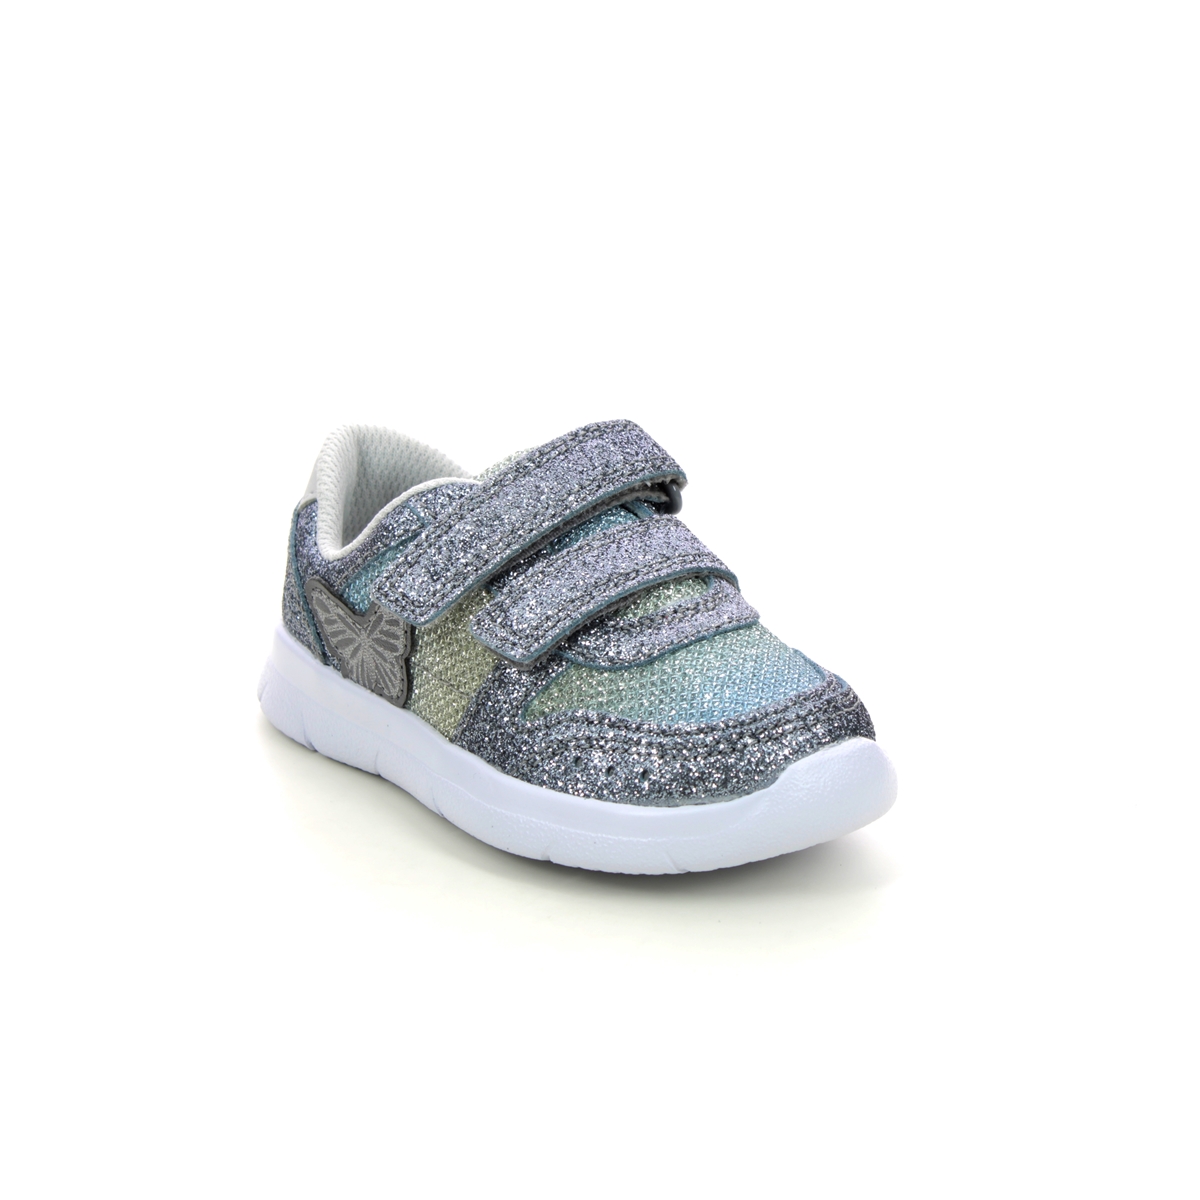 Clarks Ath Wing T Metallic Kids Toddler Girls Trainers 623197G In Size 6.5 In Plain Metallic G Width Fitting For kids